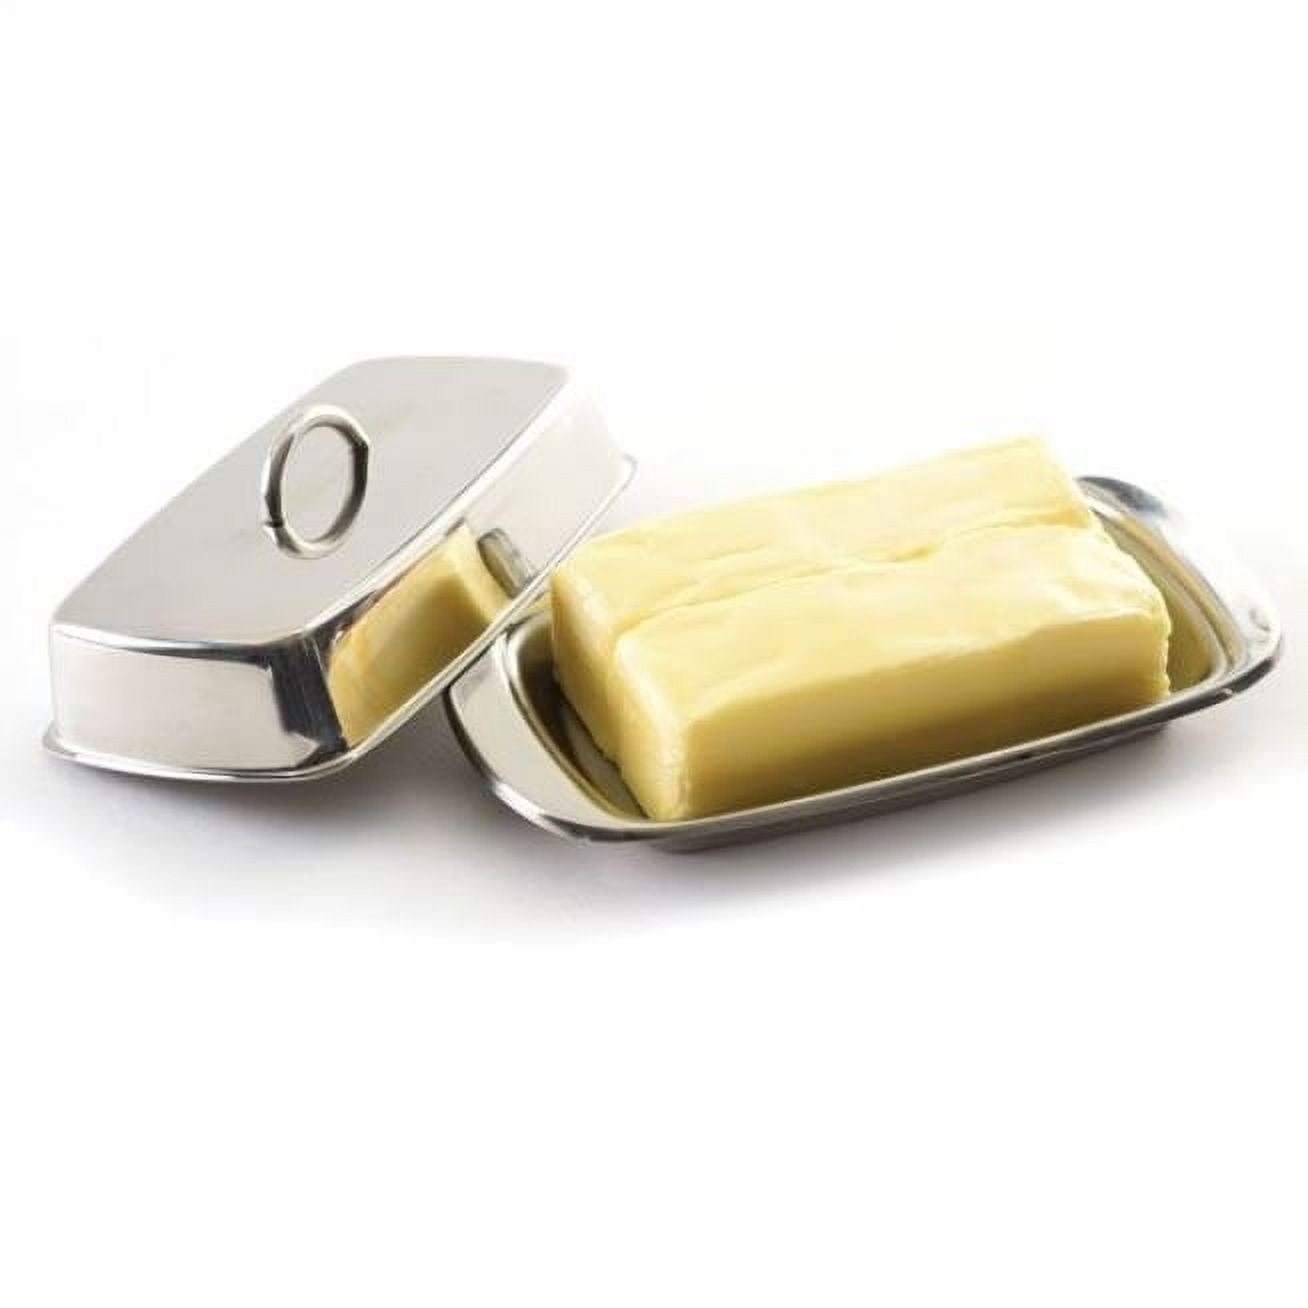 Stainless Dish | Premium Butter Dish with Lid and Easy Grip Handle | Easy  to Use and afe Safe | X 12.2 X 6.8cm transparent lid